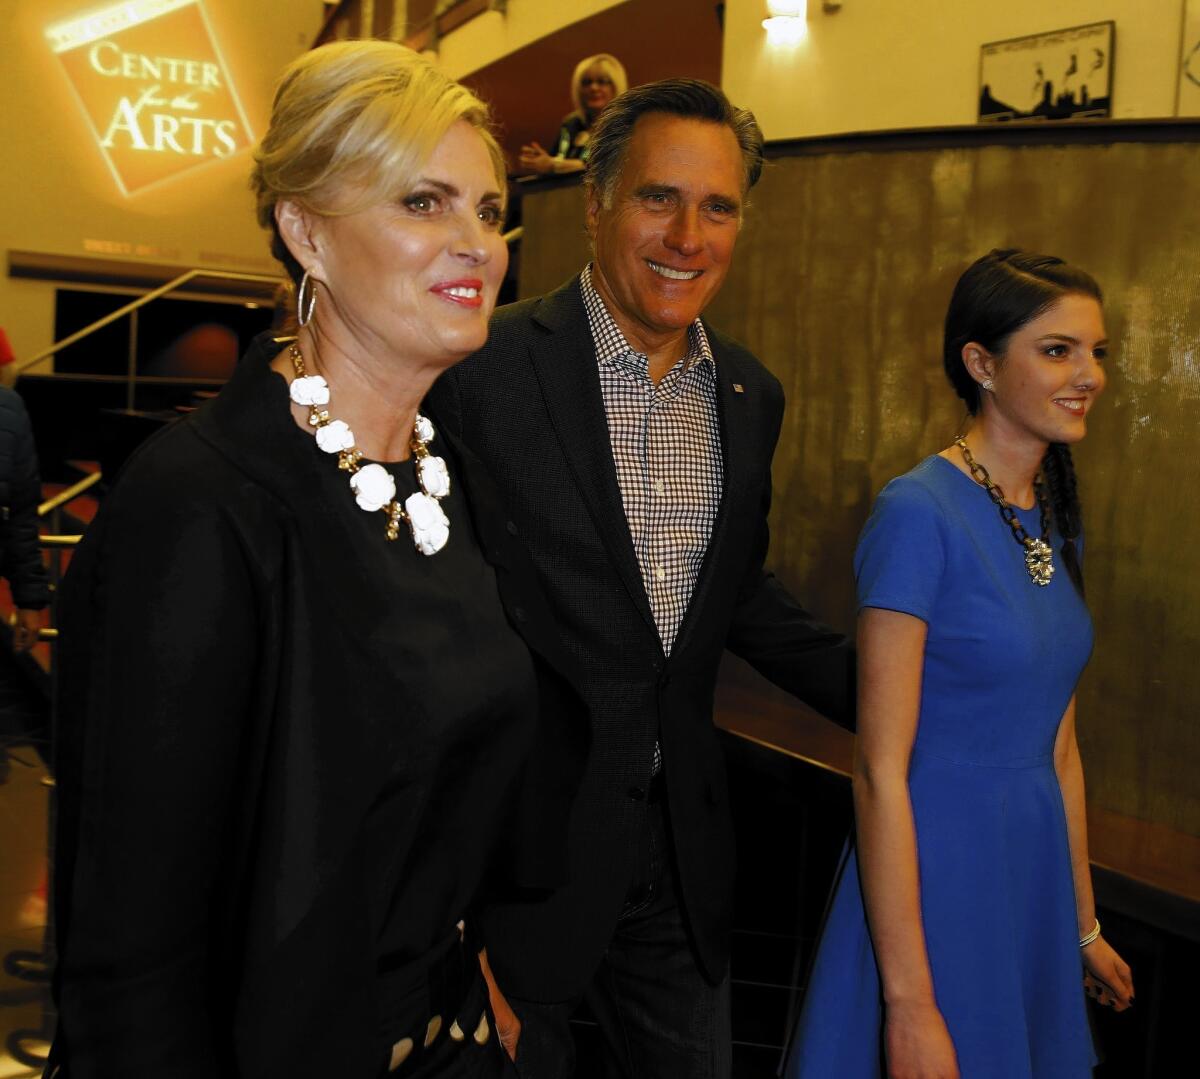 Mitt Romney, with his wife Ann and granddaughter Allie, arrive for the premiere of "Mitt" at the 2014 Sundance Film Festival.